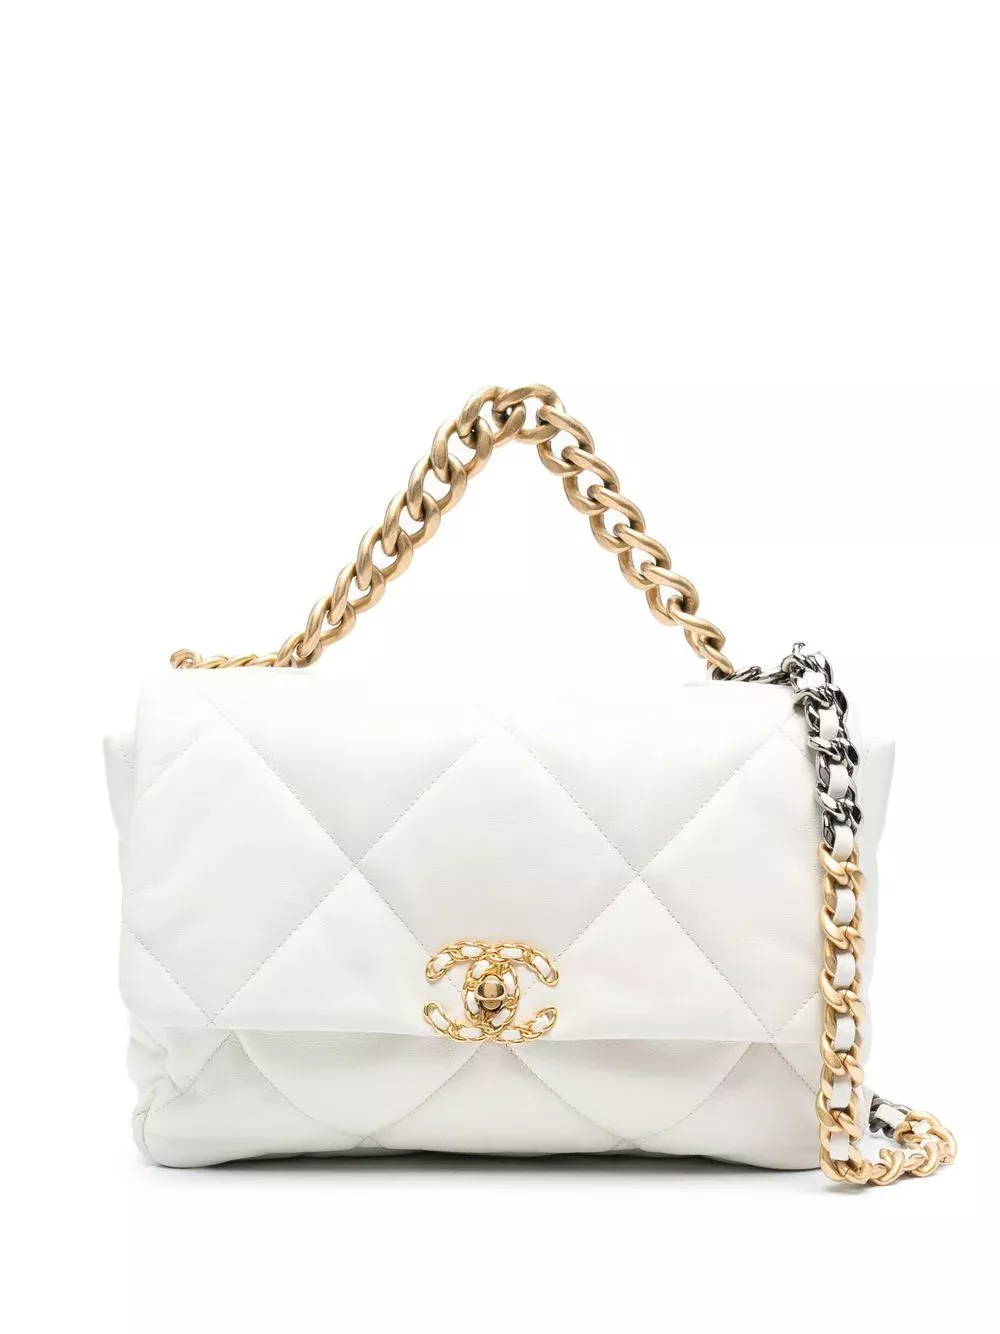 Chanel Beige Quilted Lambskin Large Chanel 19 Flap 66cc725s